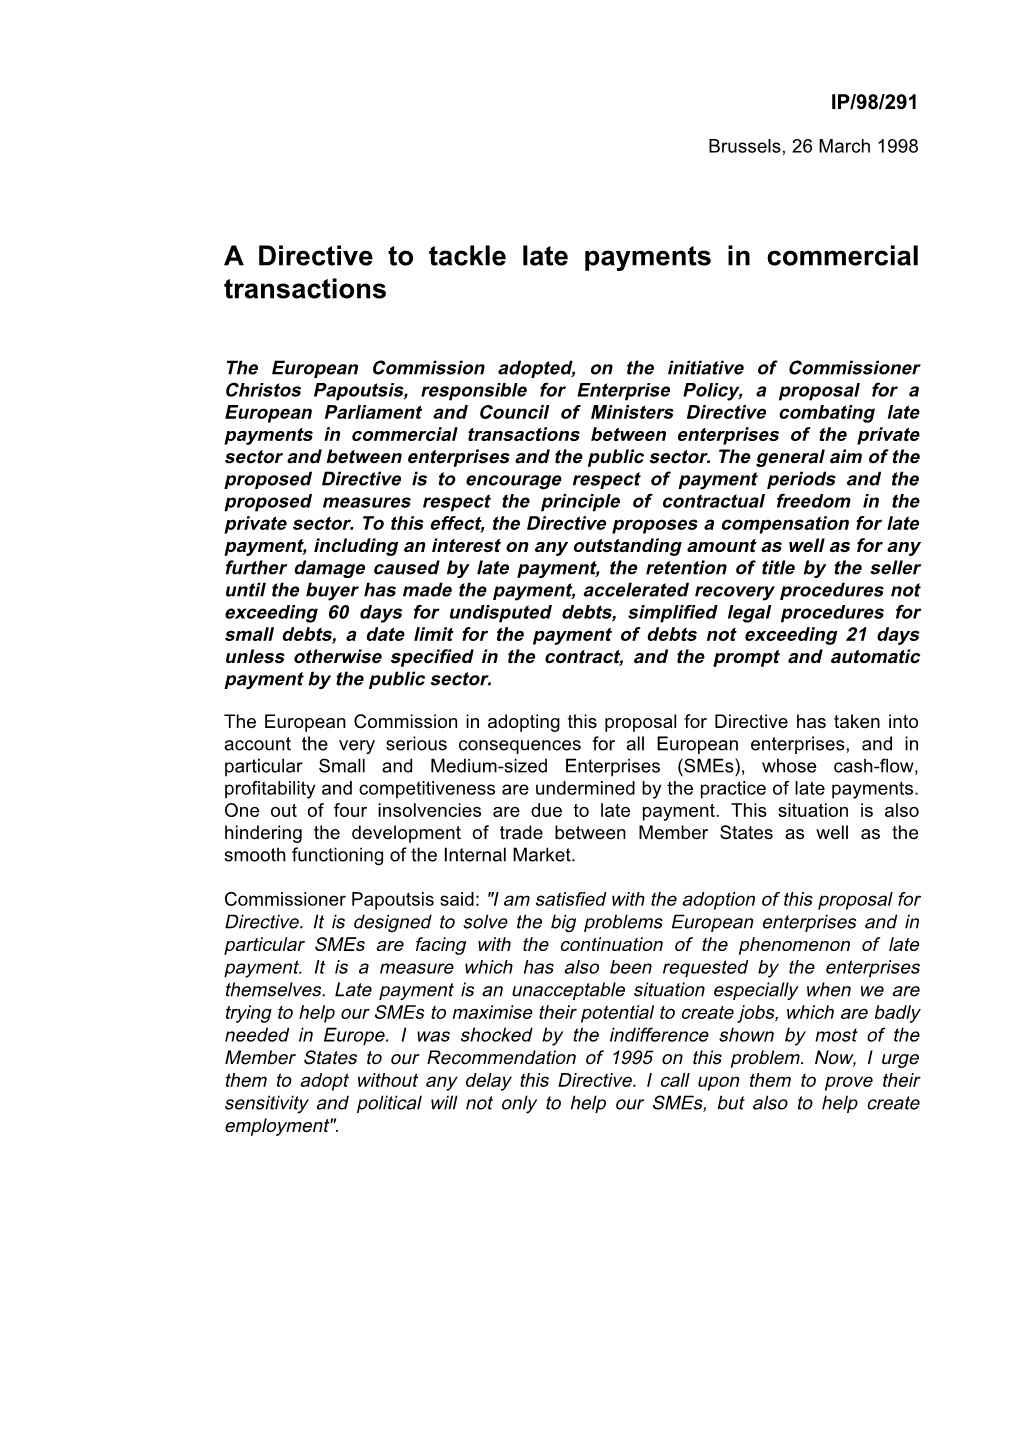 A Directive to Tackle Late Payments in Commercial Transactions